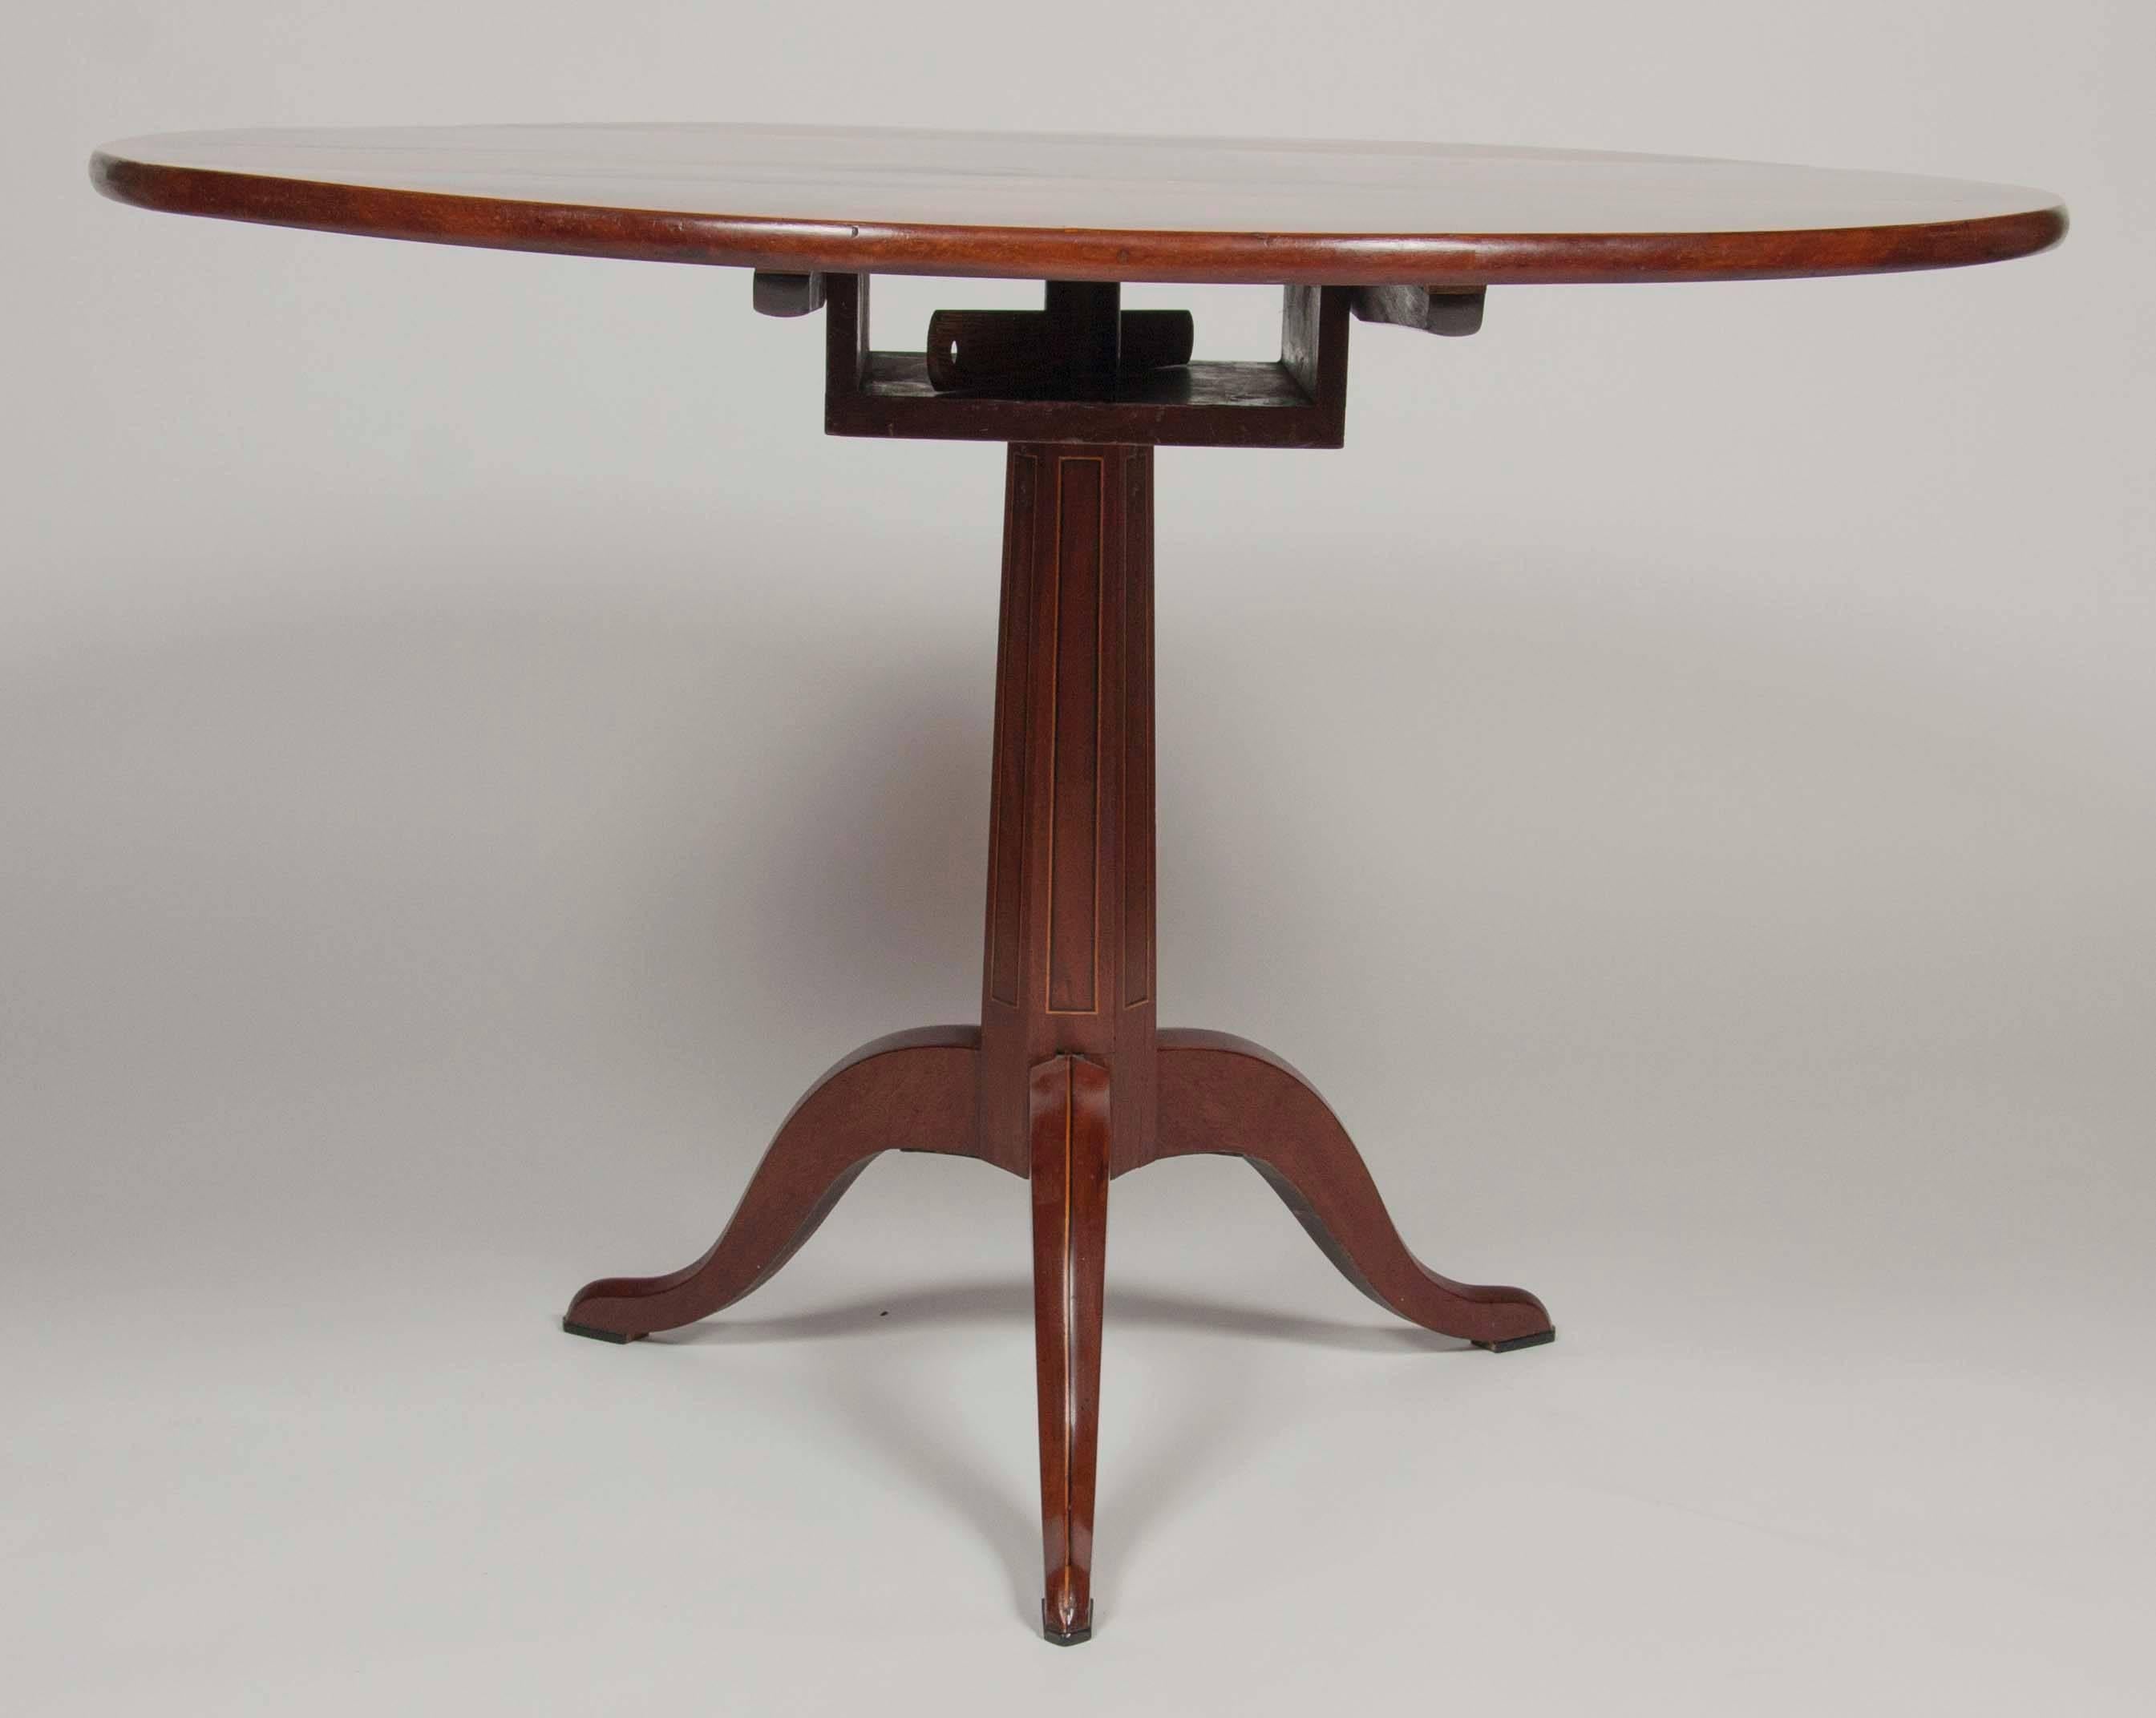 Neoclassical Revival Italian Marquetry Tilt-Top Table